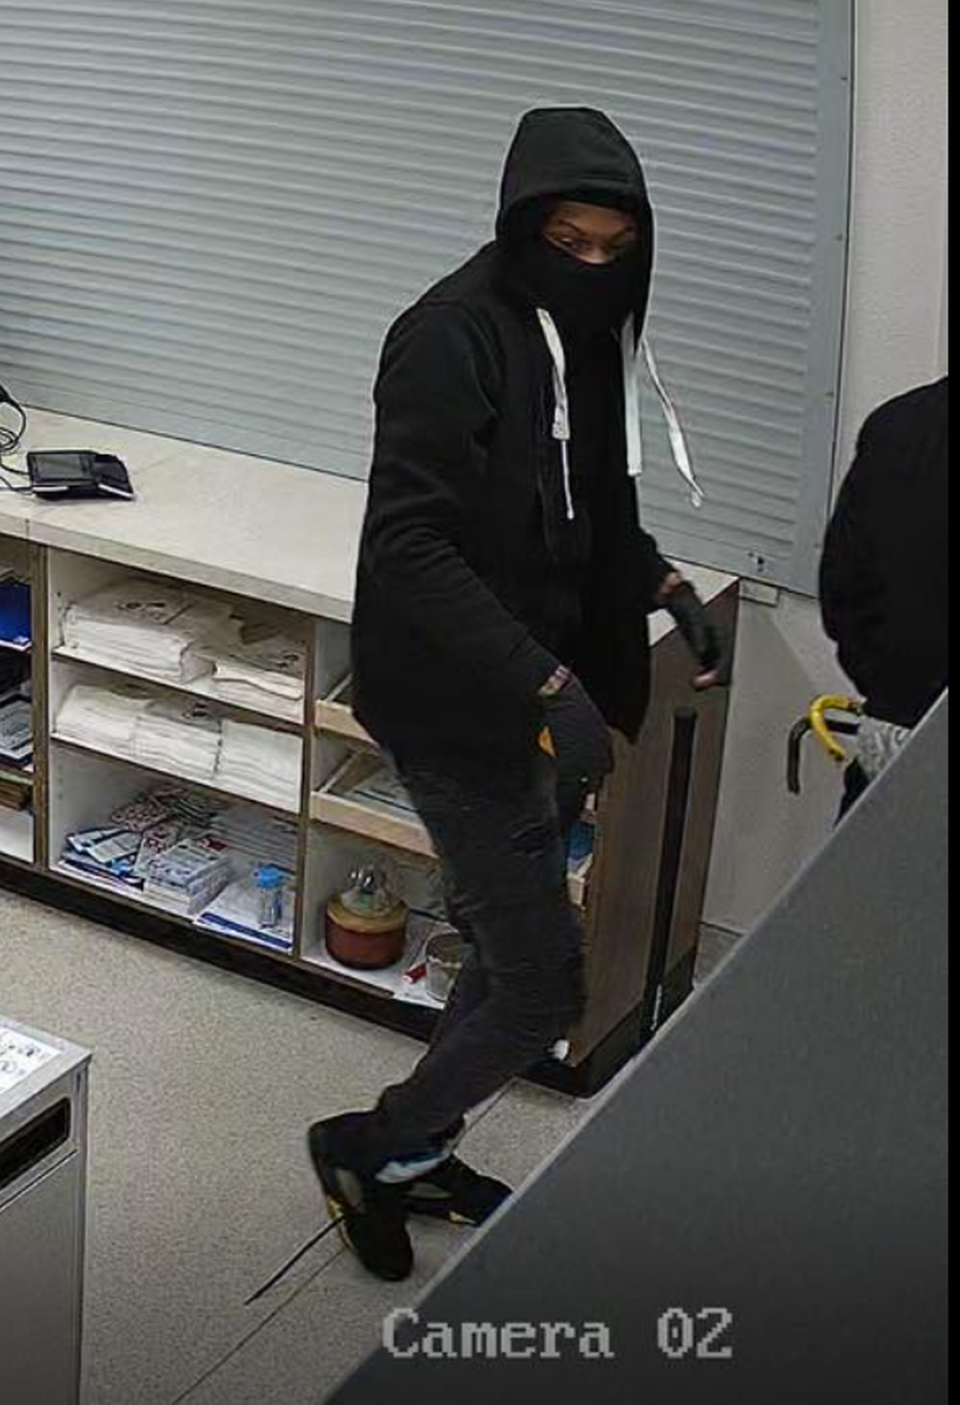 The Fort Worth Police Department is asking for the public’s help identifying four suspects who officials say stole more than $10,000 in prescription medication early Tuesday. All of the suspects wore black ski masks to hide their identity.